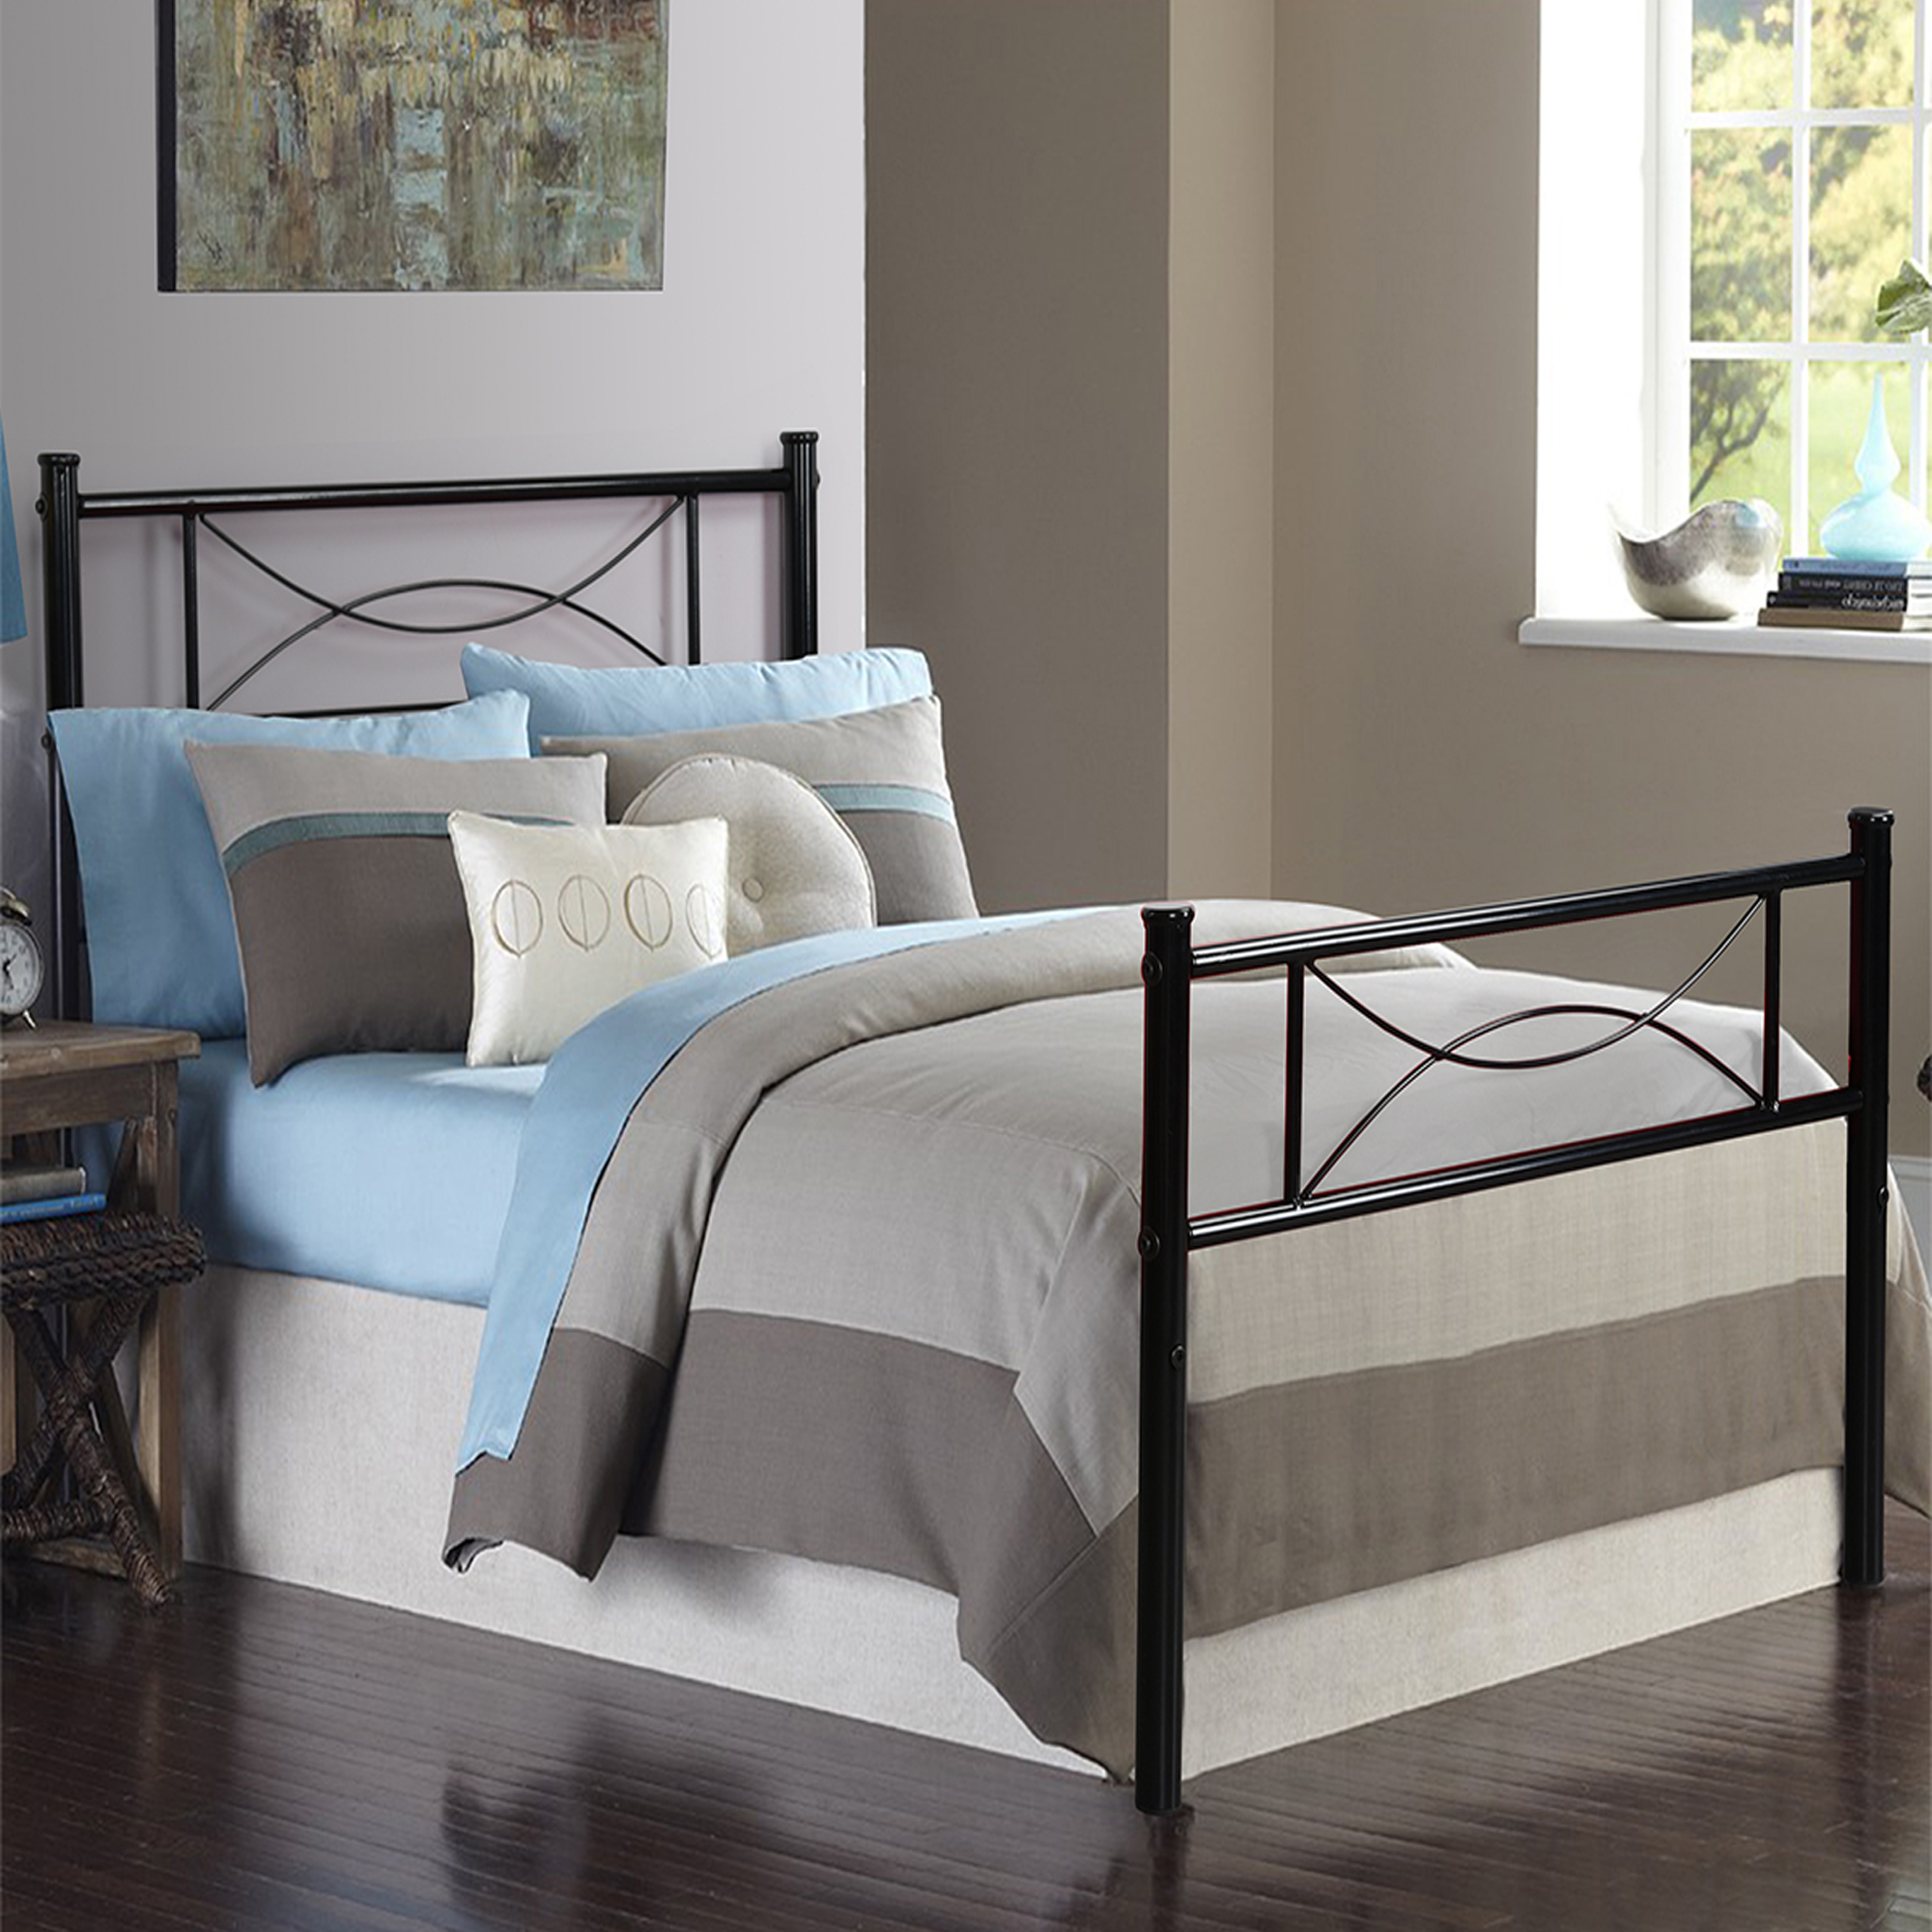 Furniture R Bedroom Metal Bed Frame, Twin Size Bed Frame And Mattress